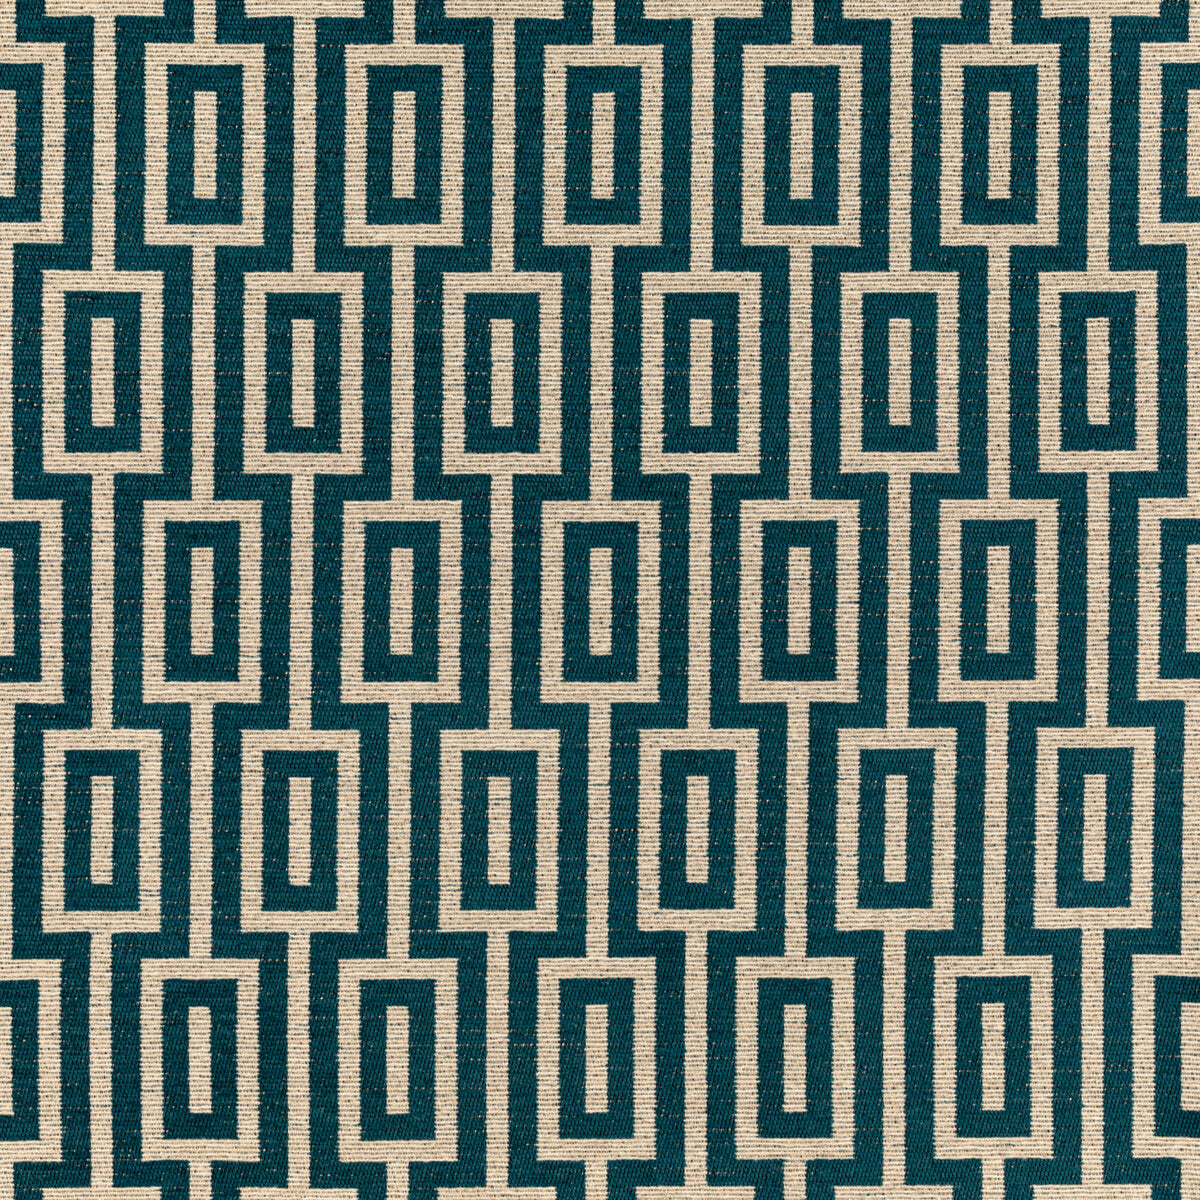 Street Key fabric in oceana color - pattern 36280.516.0 - by Kravet Contract in the Gis Crypton collection